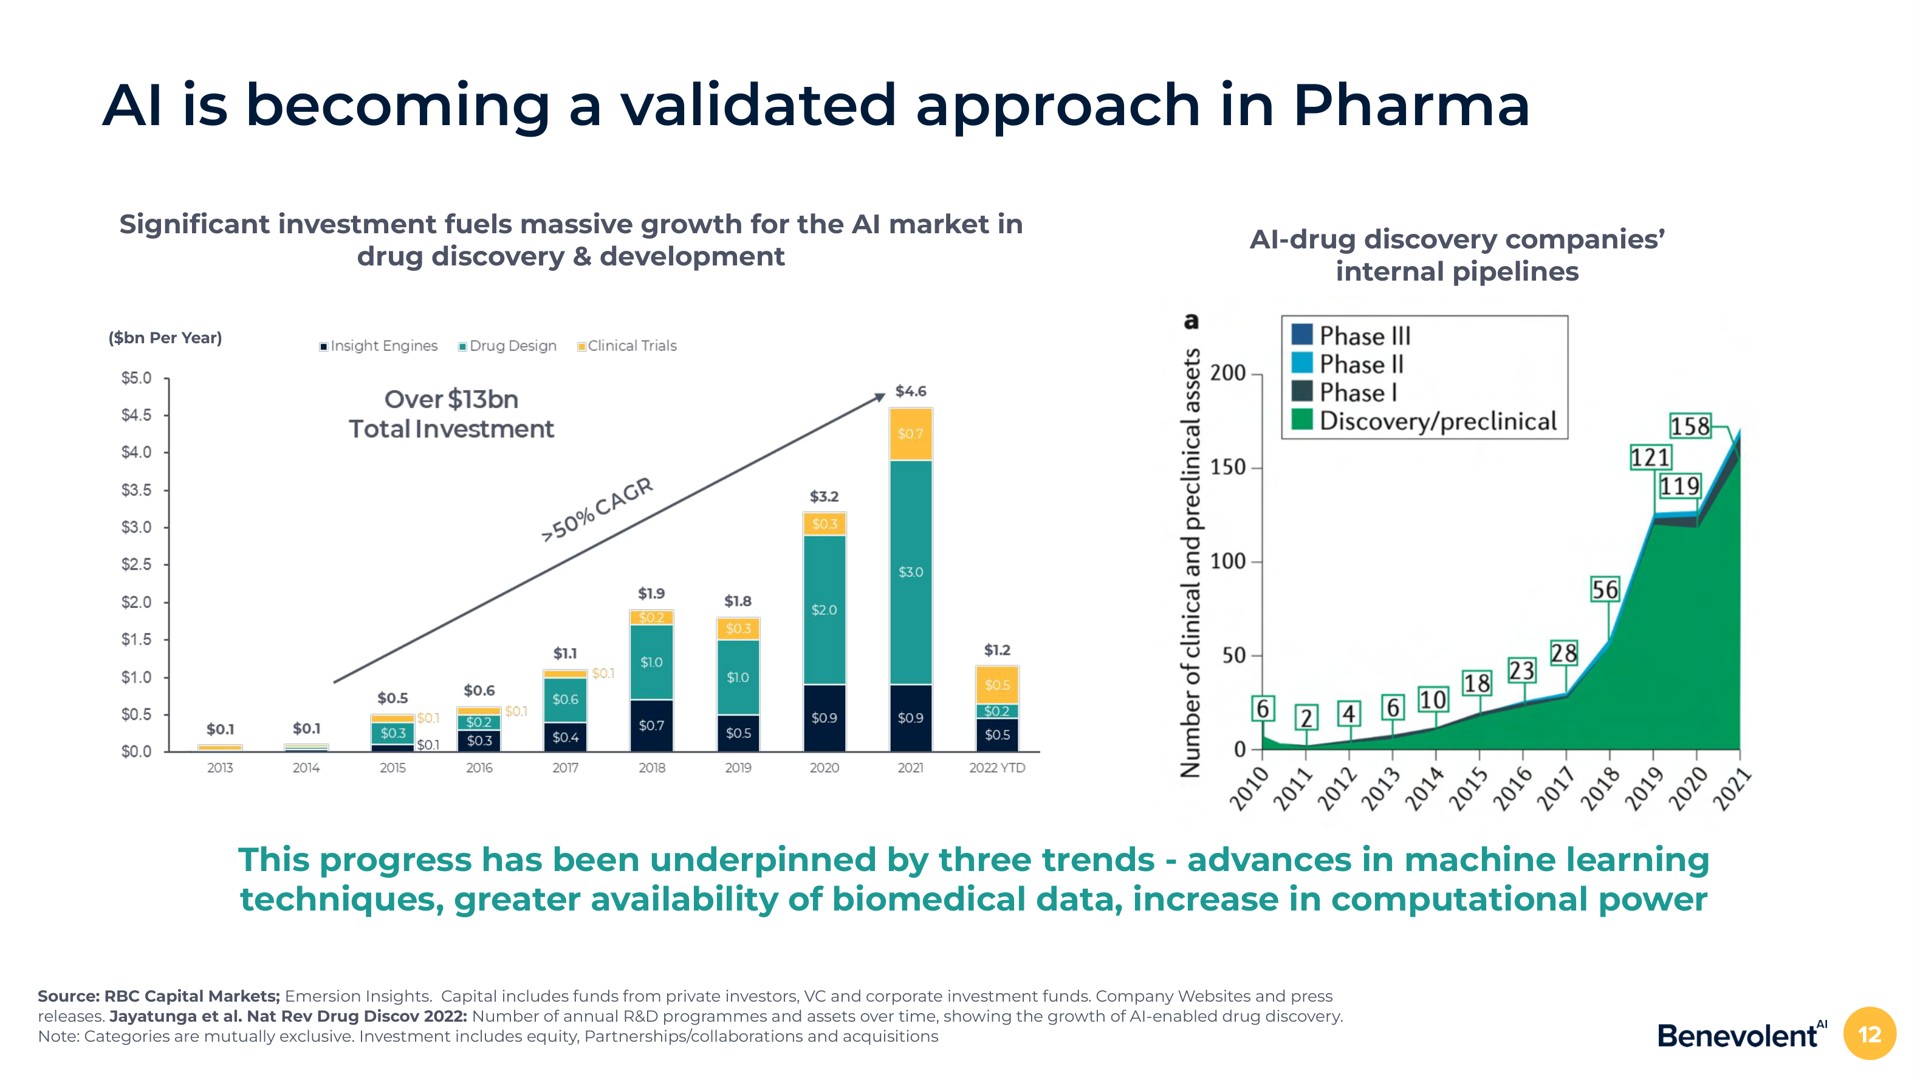 is becoming a validated approach in cant investment fuels massive growth for the market in drug discovery development drug discovery companies internal pipelines this progress has been underpinned by three trends advances in machine learning techniques greater availability of data increase in computational power | BenevolentAI